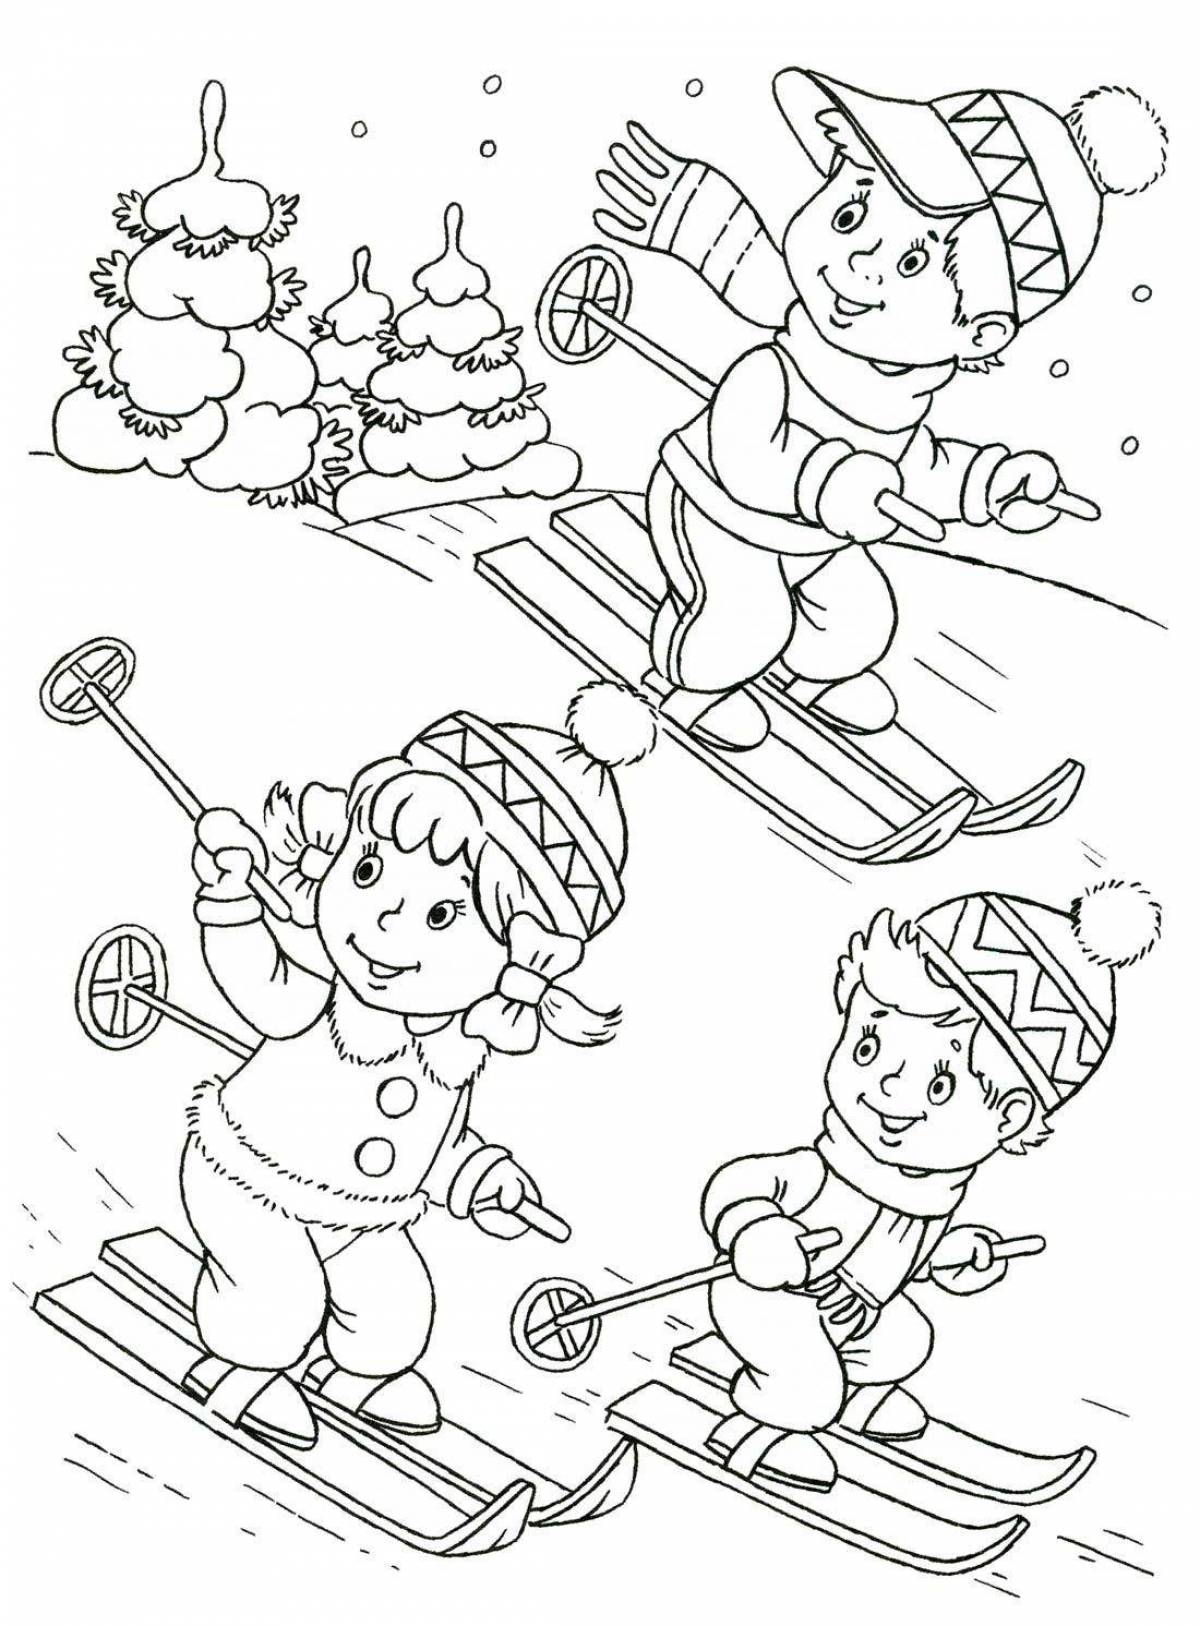 A fun winter coloring book for kids 4-5 years old